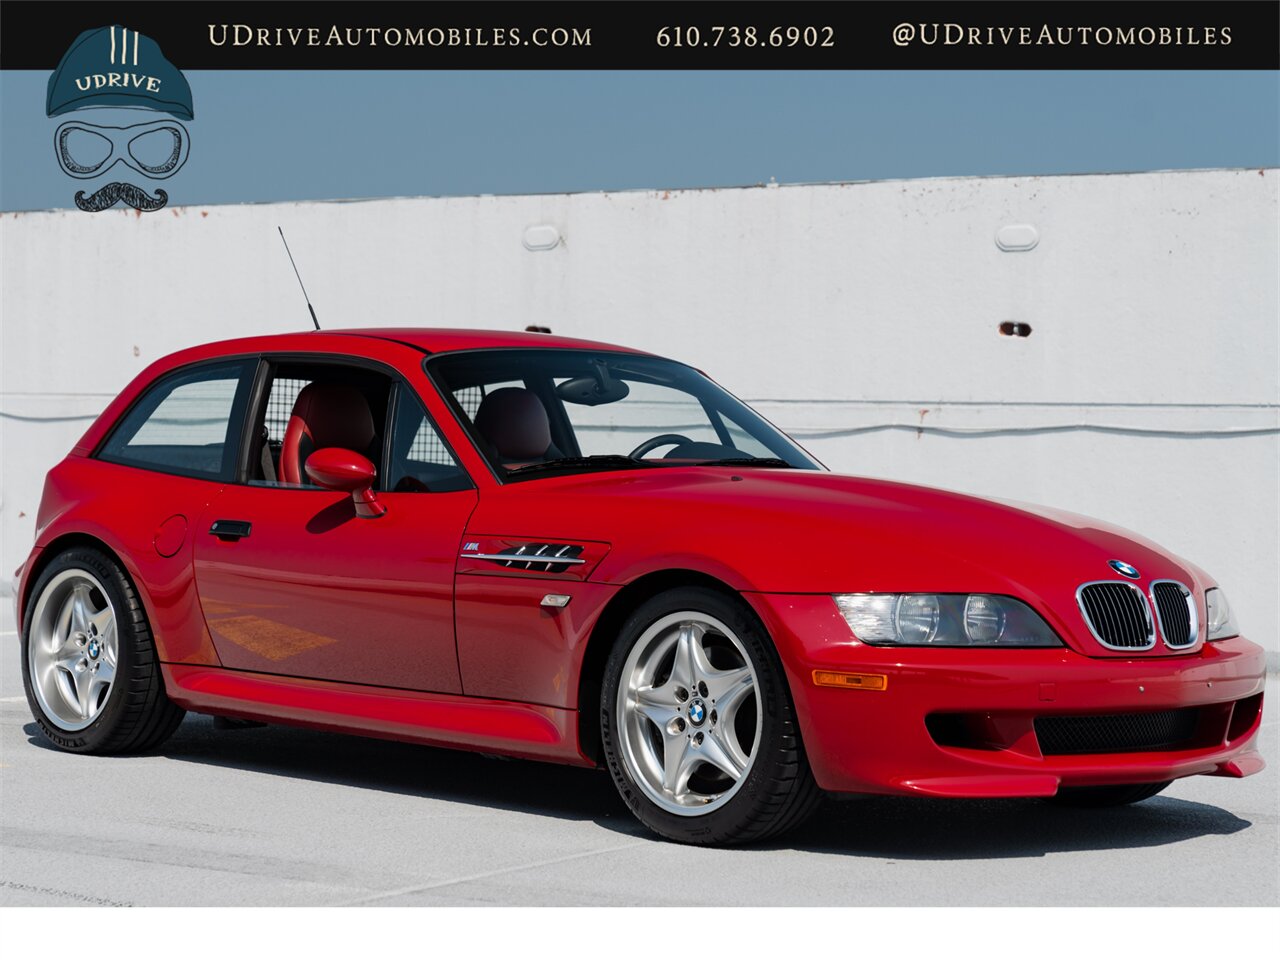 2000 BMW Z3 M  Coupe 25k Miles  Sunroof Delete $4k Recent Service - Photo 15 - West Chester, PA 19382